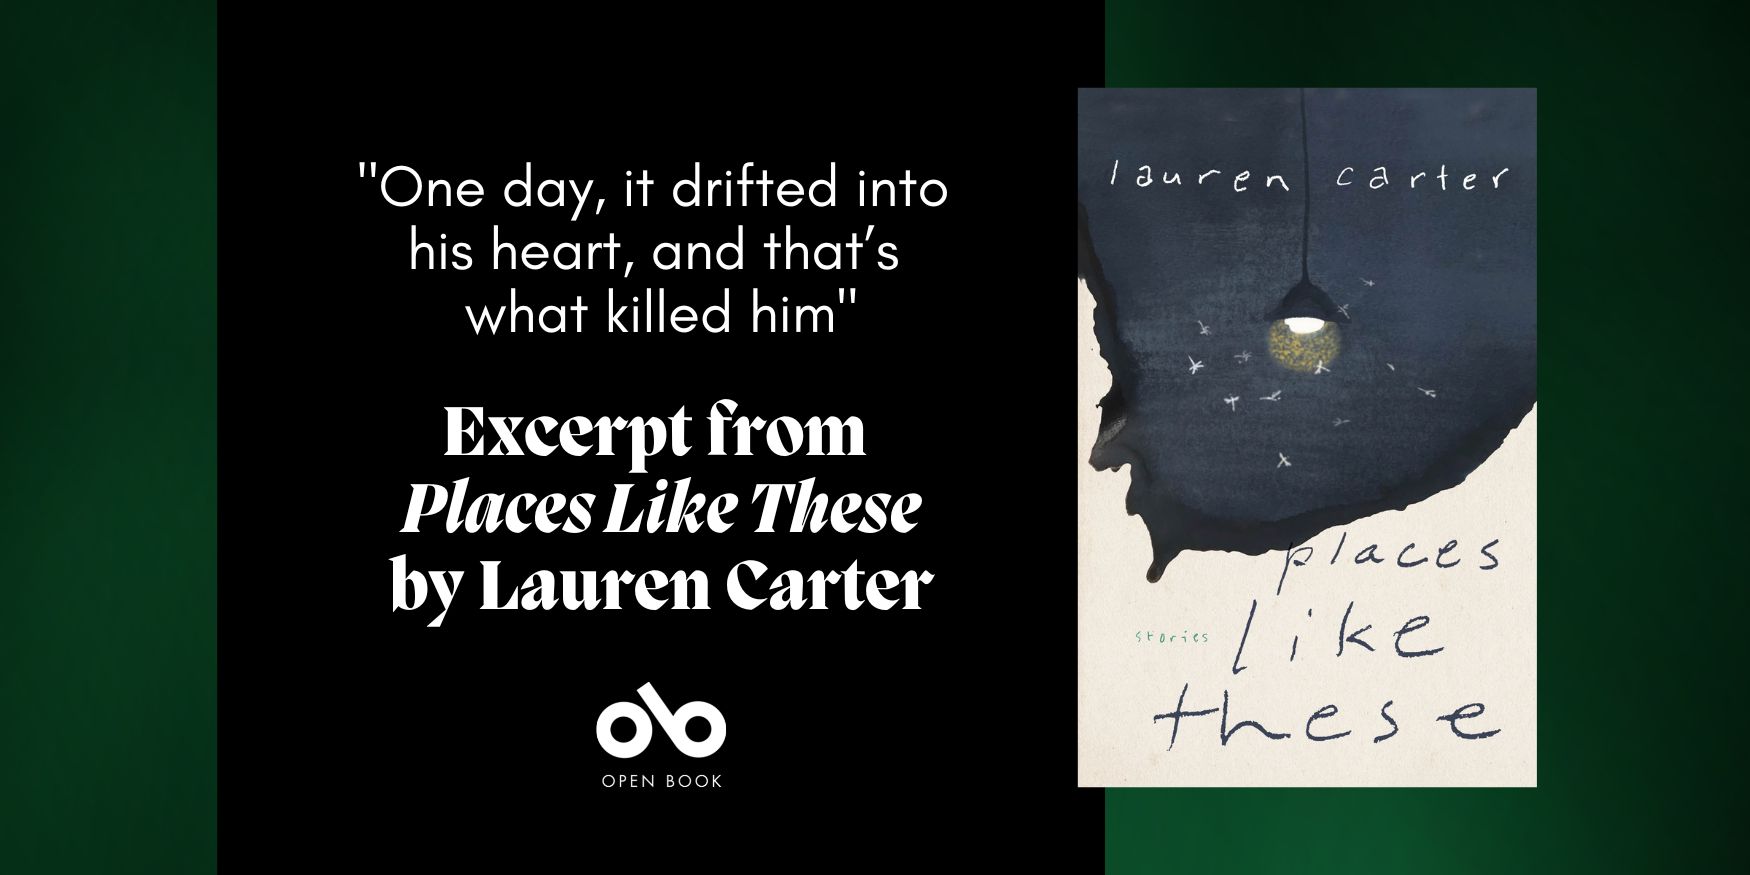 Banner image with the cover from Lauren Carter's Places Like These and the quote "One day it drifted into his heart and that's what killed him. Excerpt from Lauren Carter's Places Like These"